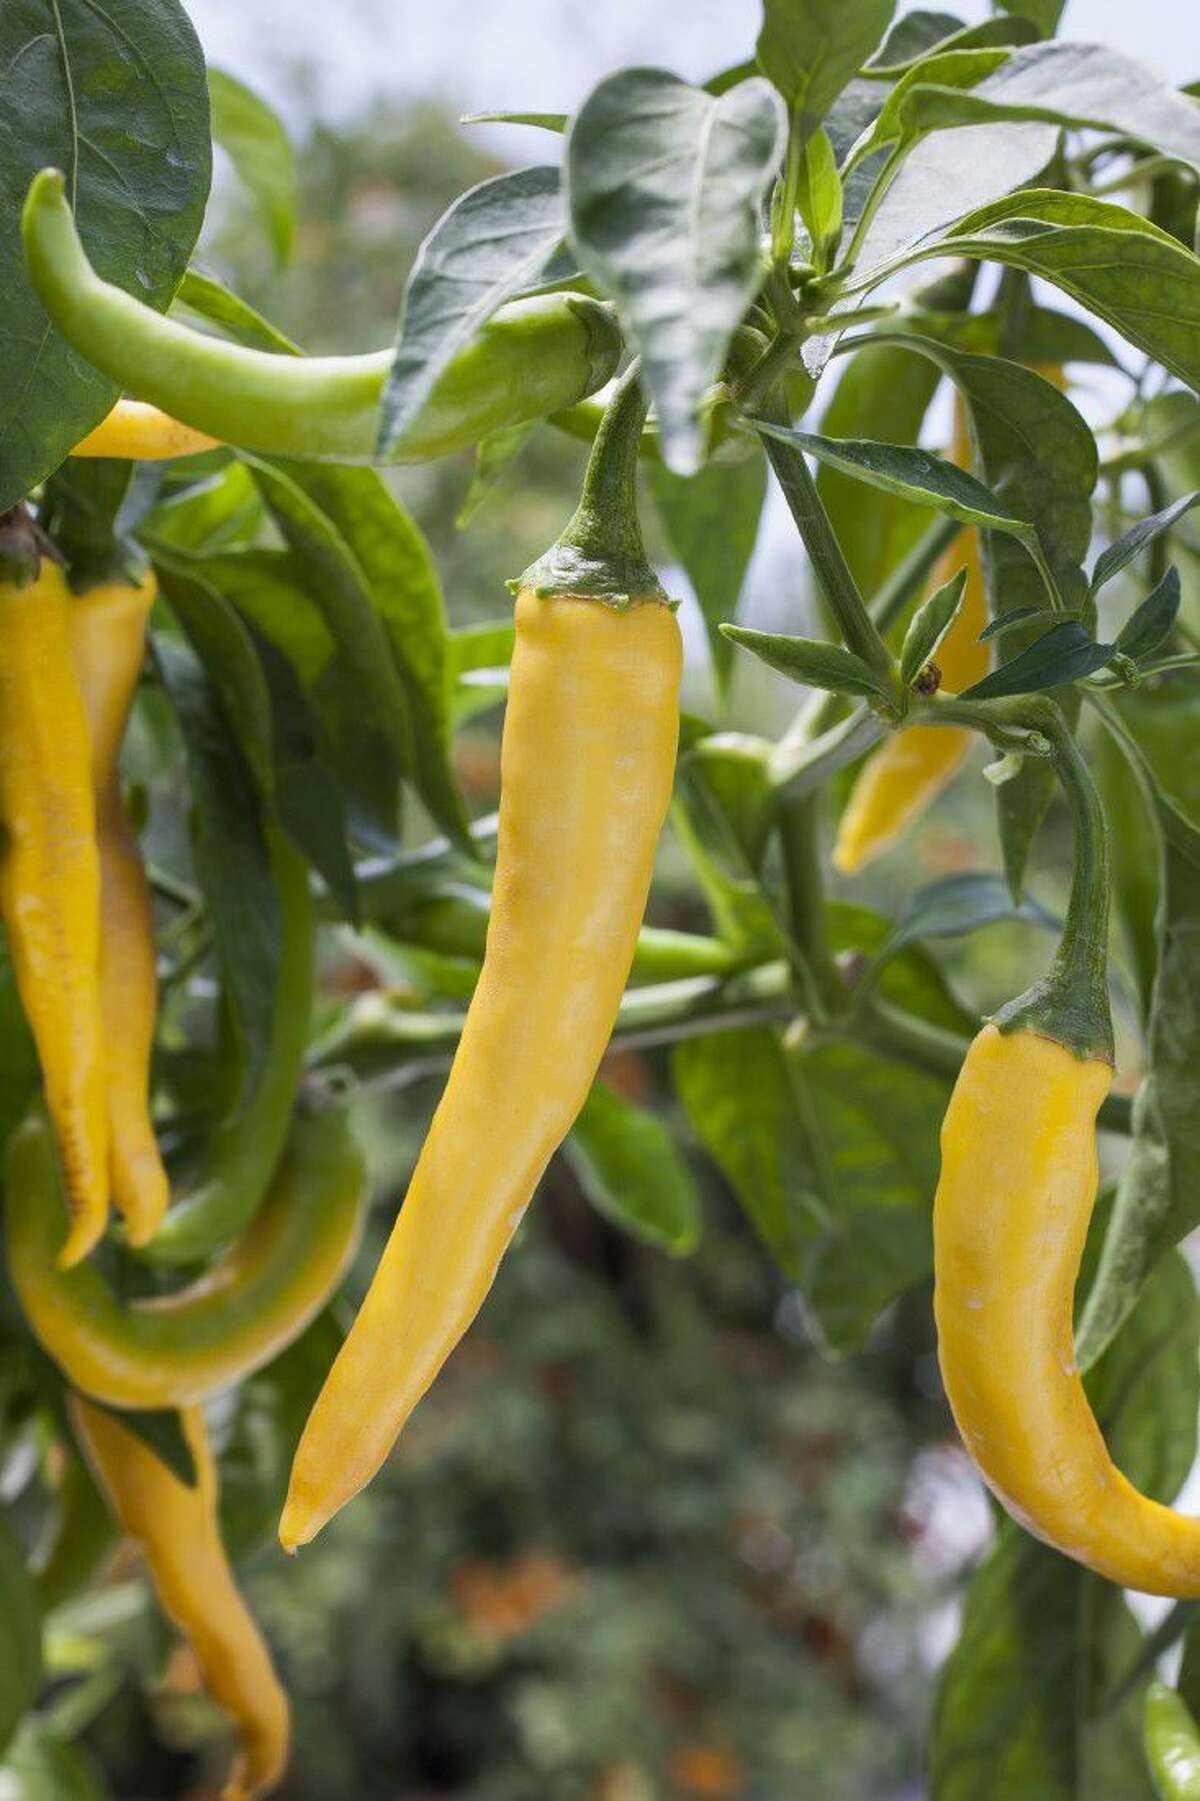 Golden cayenne peppers are hot with a Scoville heat level of 30,000 to 50,000.Photo credit: courtesy of Bonnie Plants